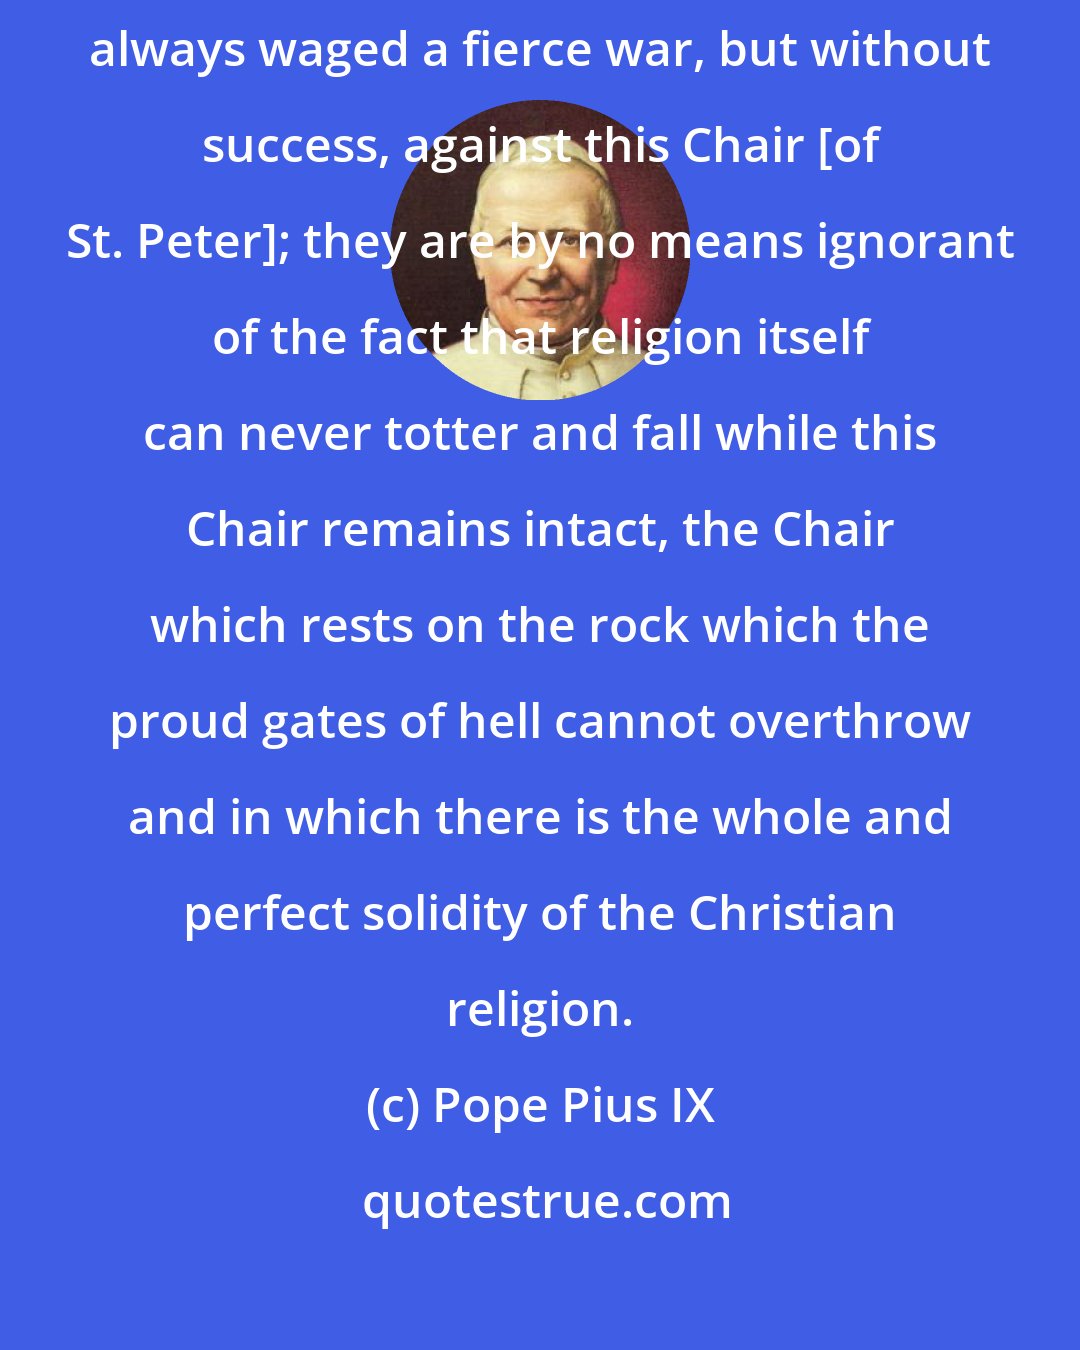 Pope Pius IX: Now you know well that the most deadly foes of the Catholic religion have always waged a fierce war, but without success, against this Chair [of St. Peter]; they are by no means ignorant of the fact that religion itself can never totter and fall while this Chair remains intact, the Chair which rests on the rock which the proud gates of hell cannot overthrow and in which there is the whole and perfect solidity of the Christian religion.